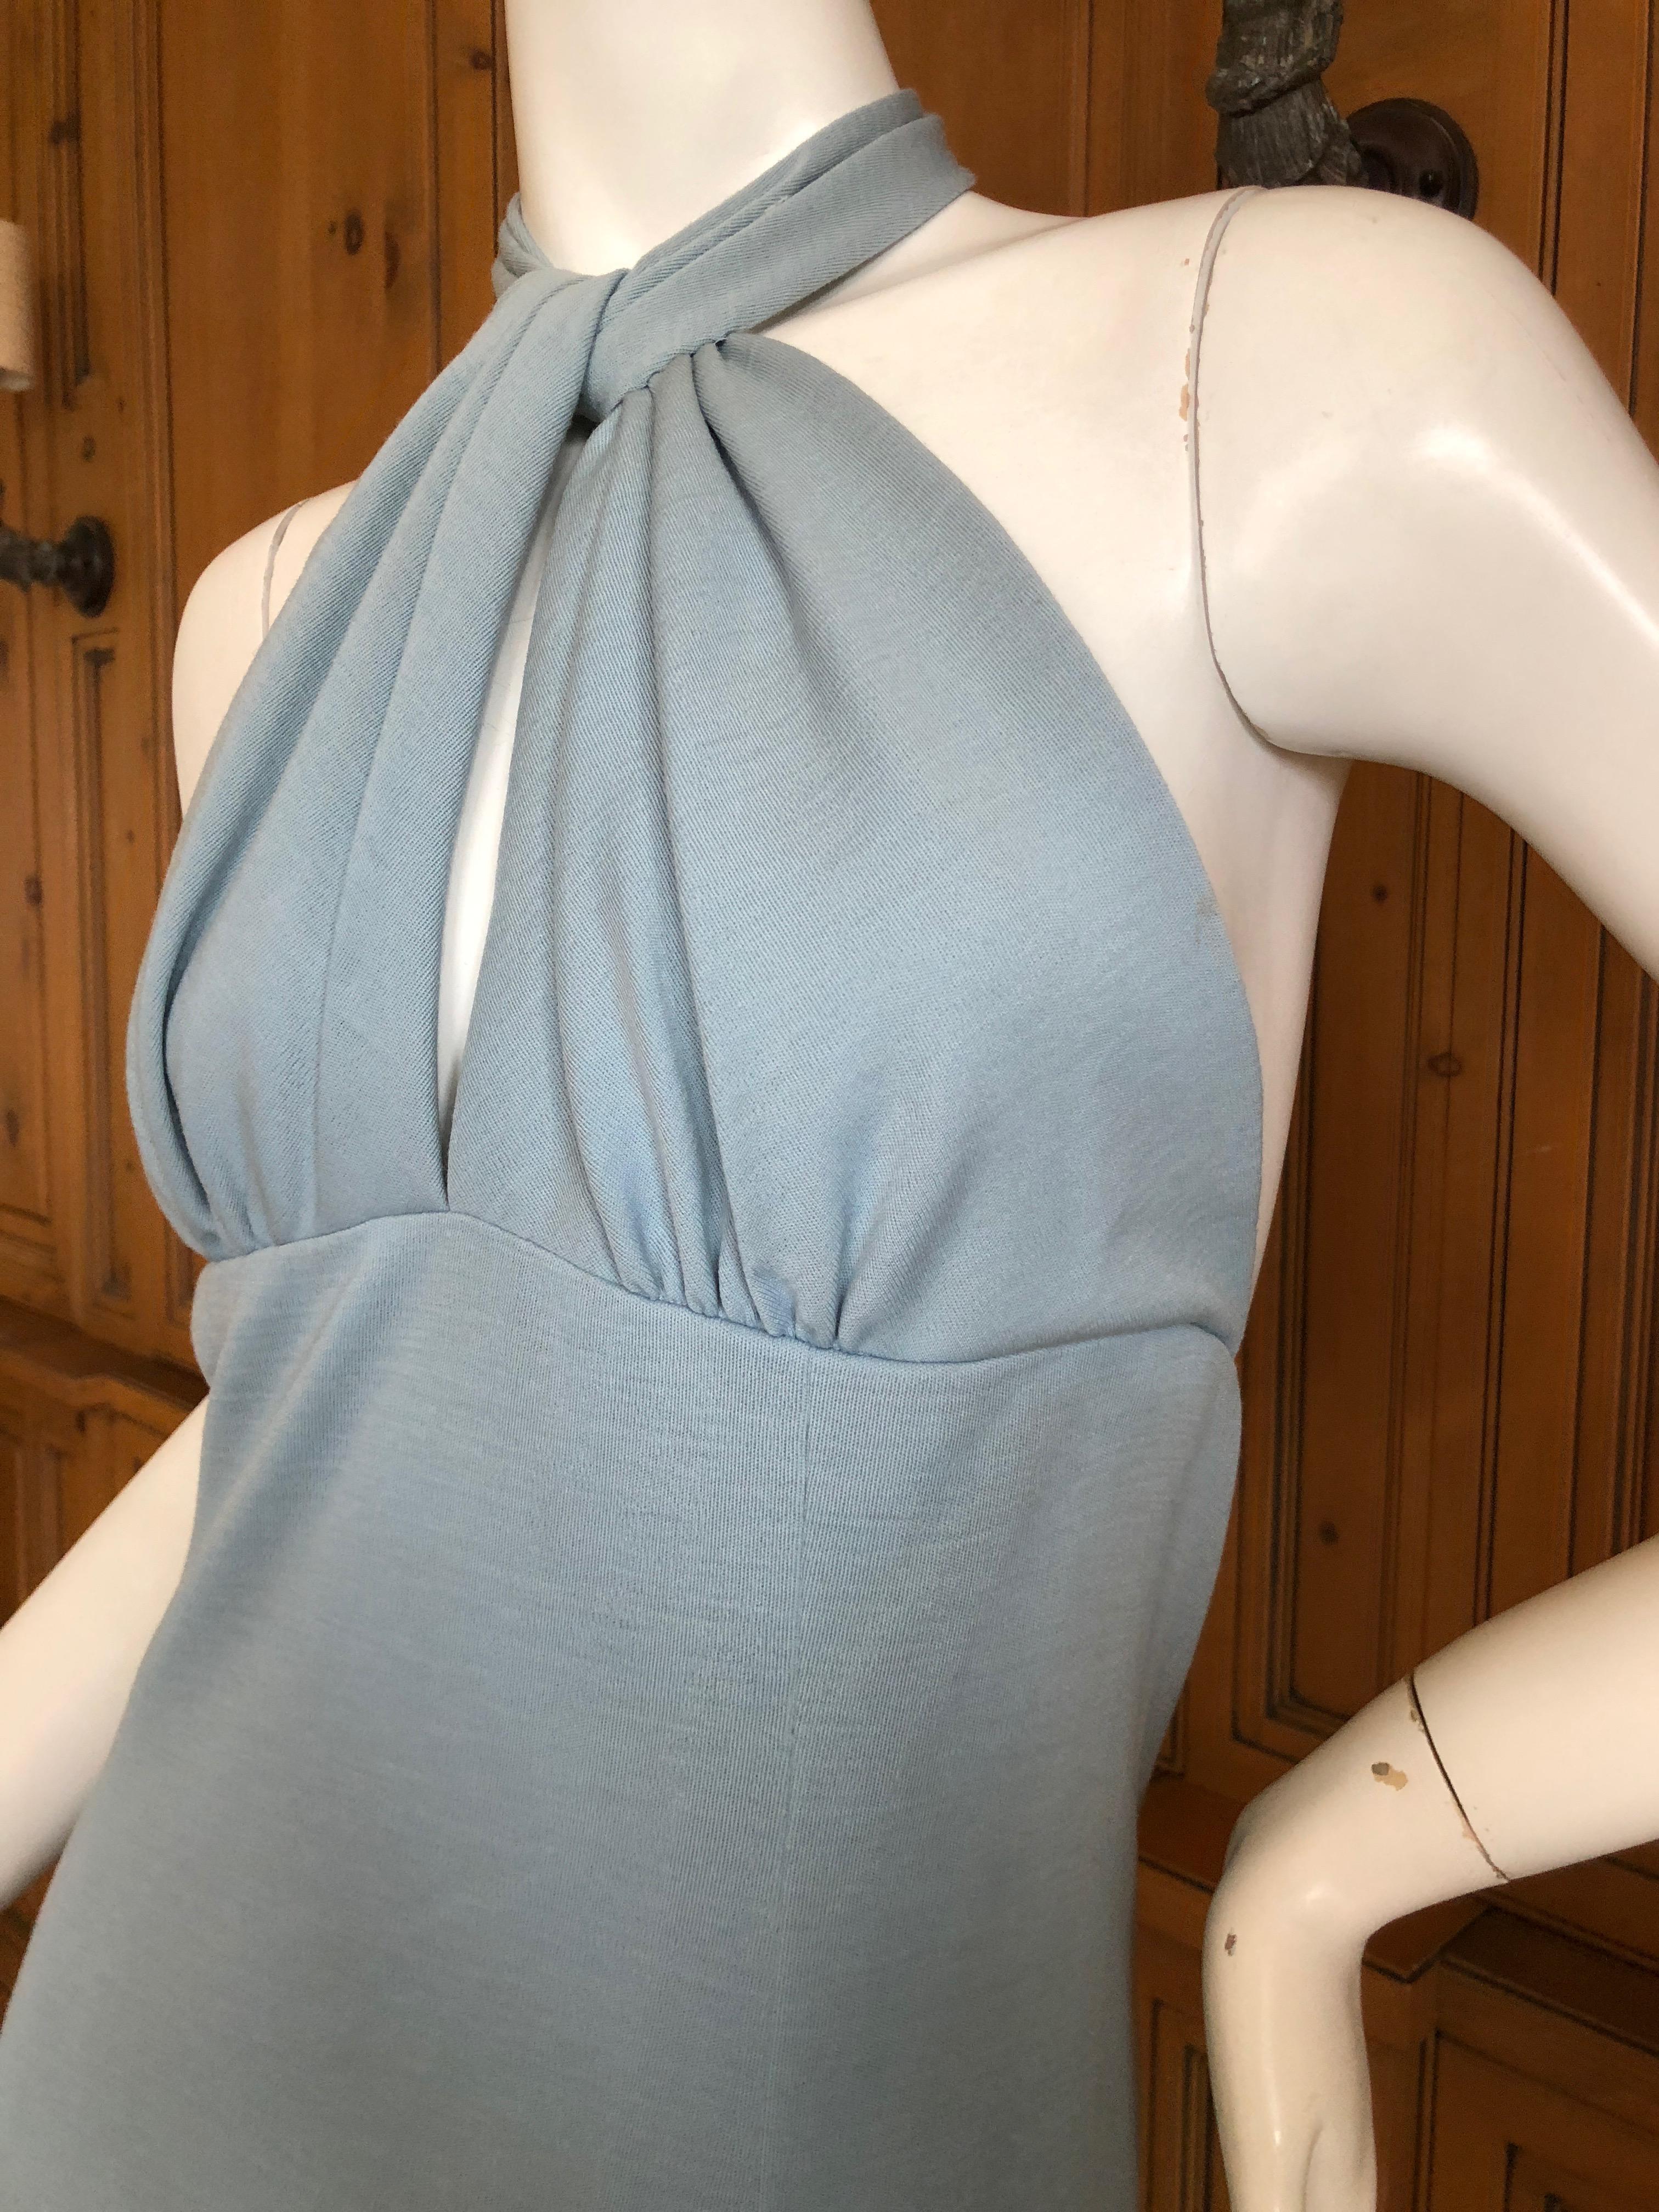 Cardinali Blue Crepe Jersey Keyhole Halter Evening Dress  Fall 1973
From the Archive of Marilyn Lewis, the creator of Cardinali
Cardinali was founded in Los Angeles in 1970, by Marilyn Lewis, who had already found success as the founder and owner of